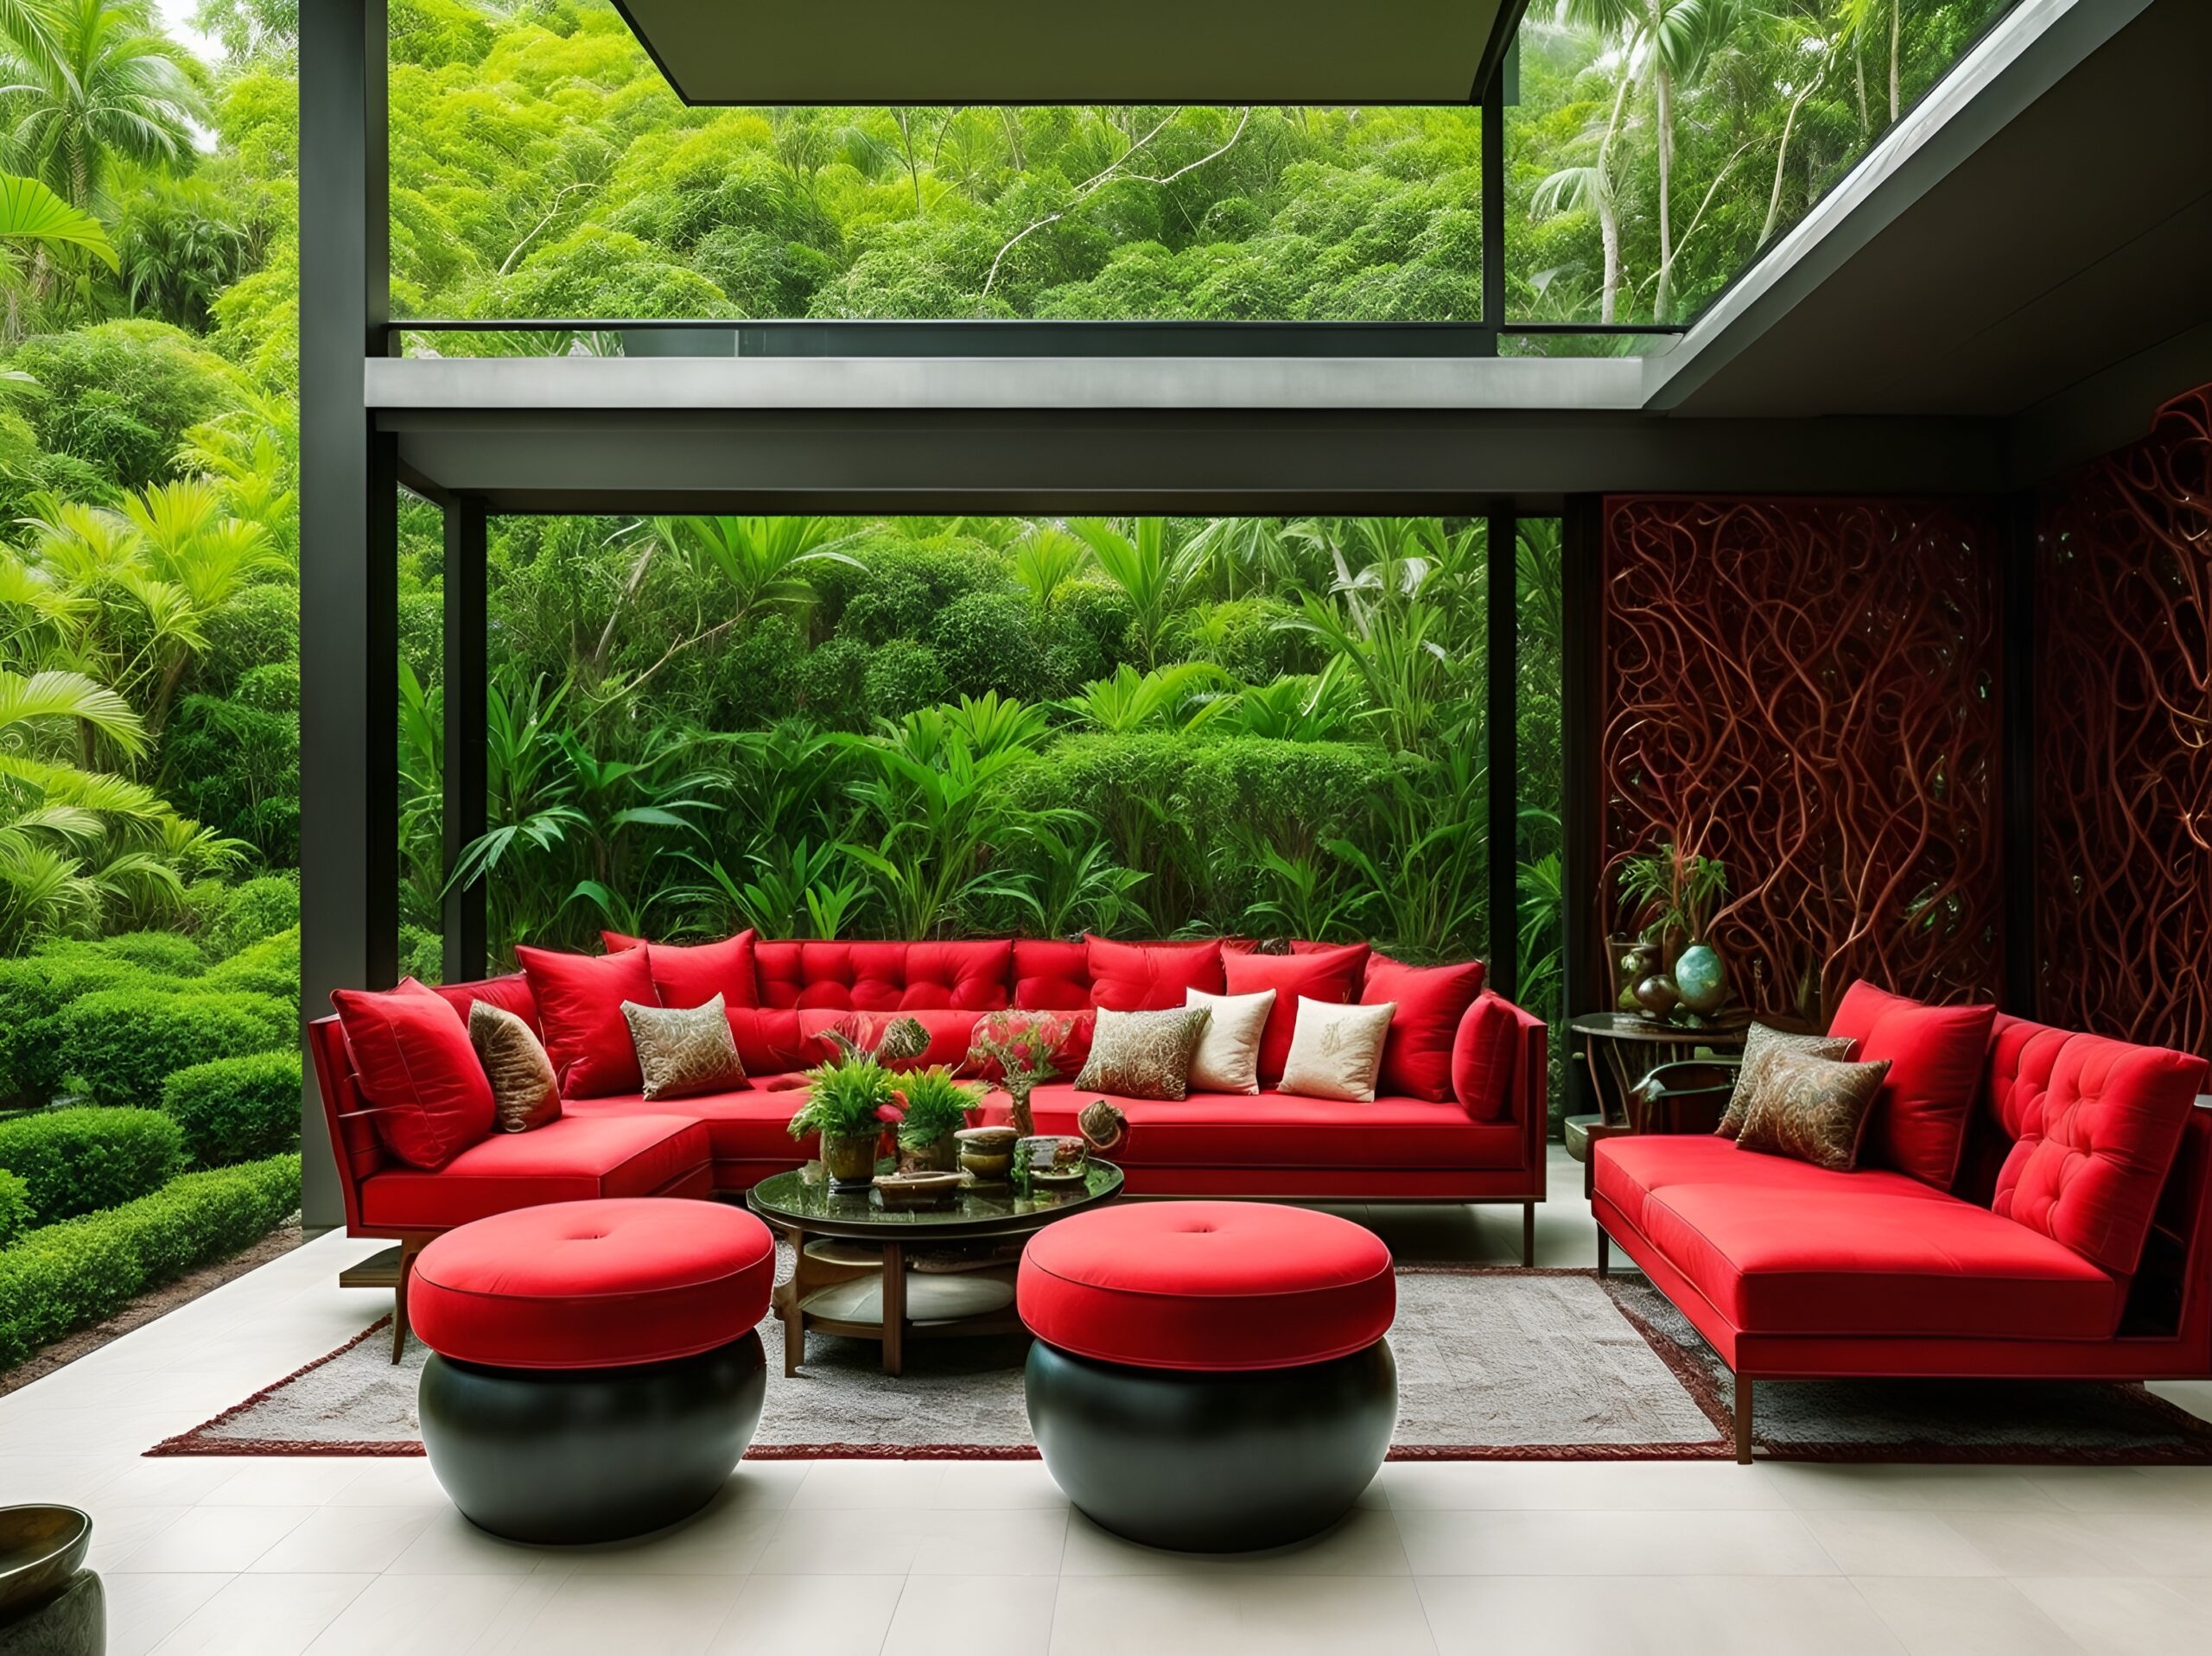 Purchasing a property to add your luxury red outdoor seating arrangement on a patio